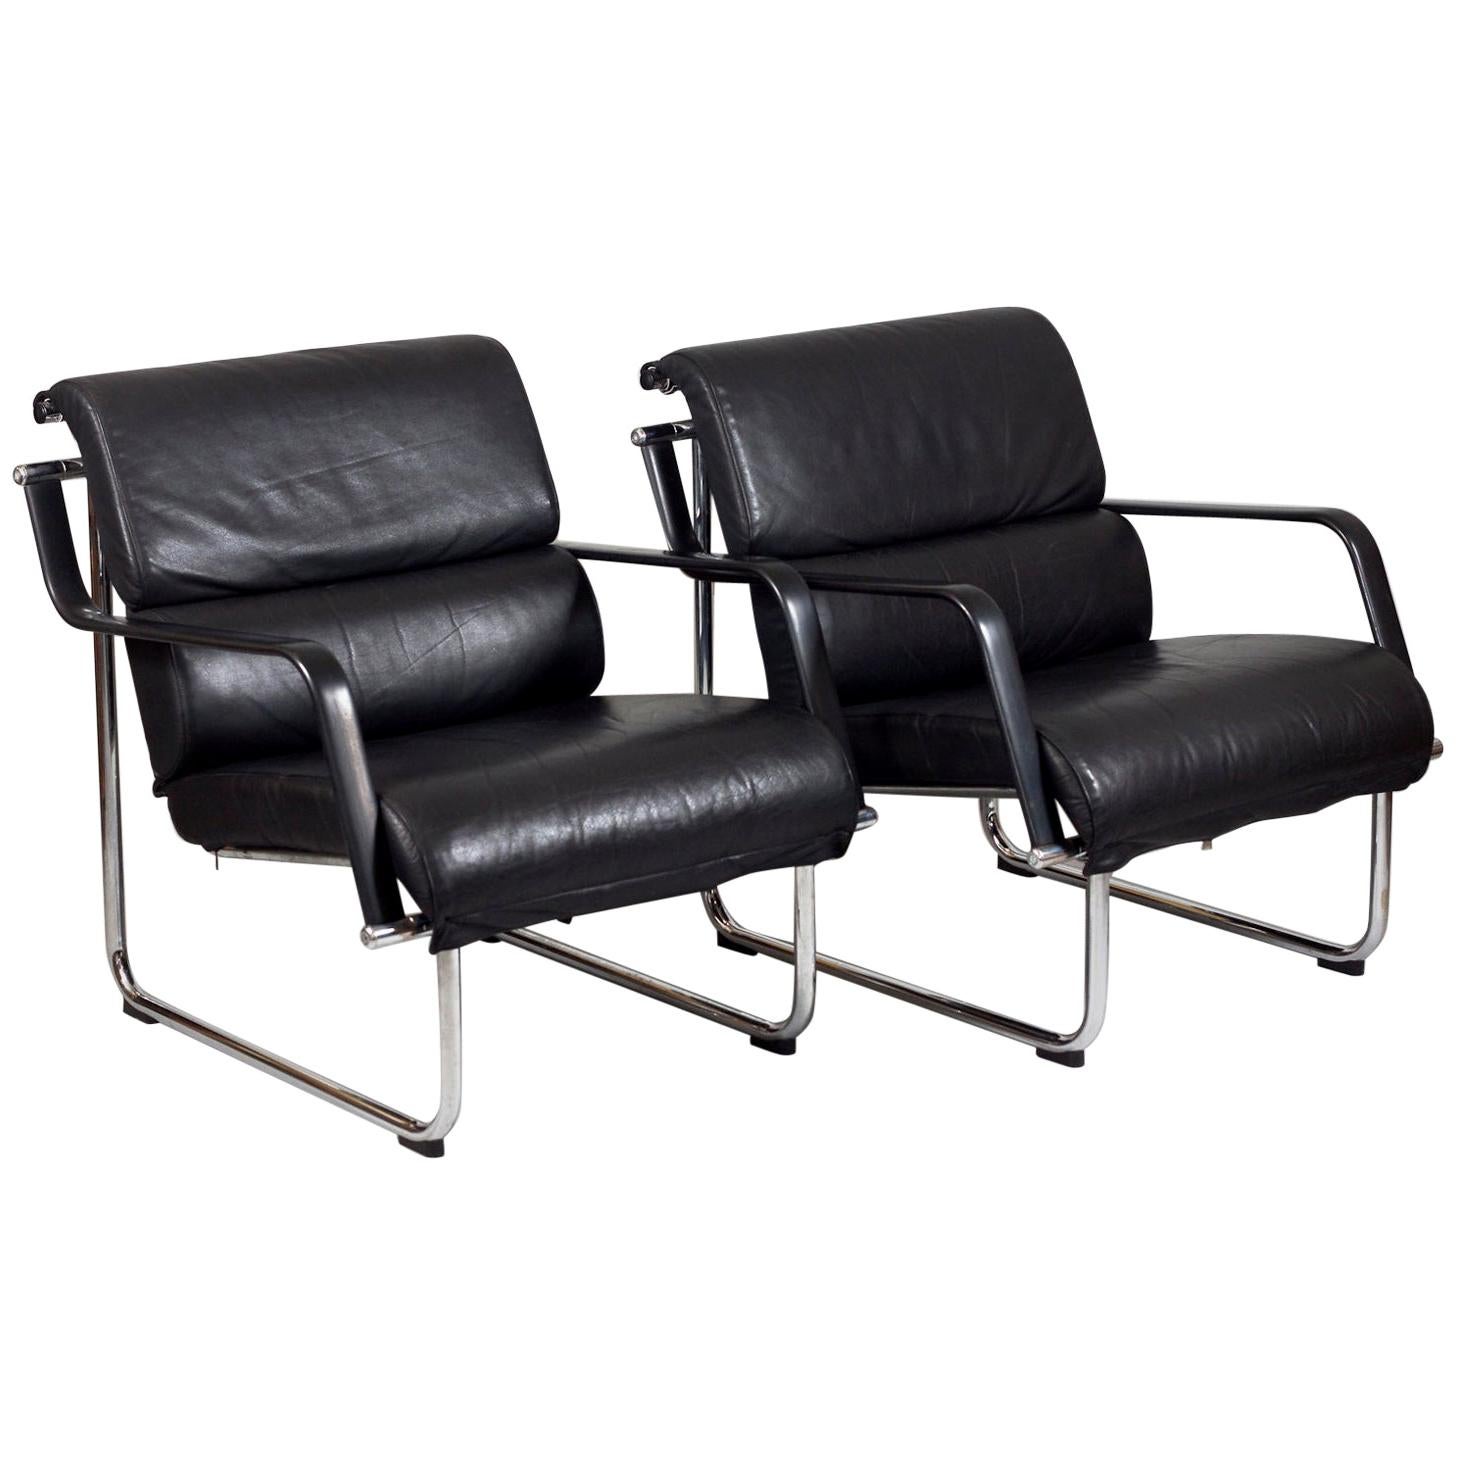 Pair of 1960s Black Leather "Remmi" Easy Chairs by Yrjö Kukkapuro, Finland For Sale